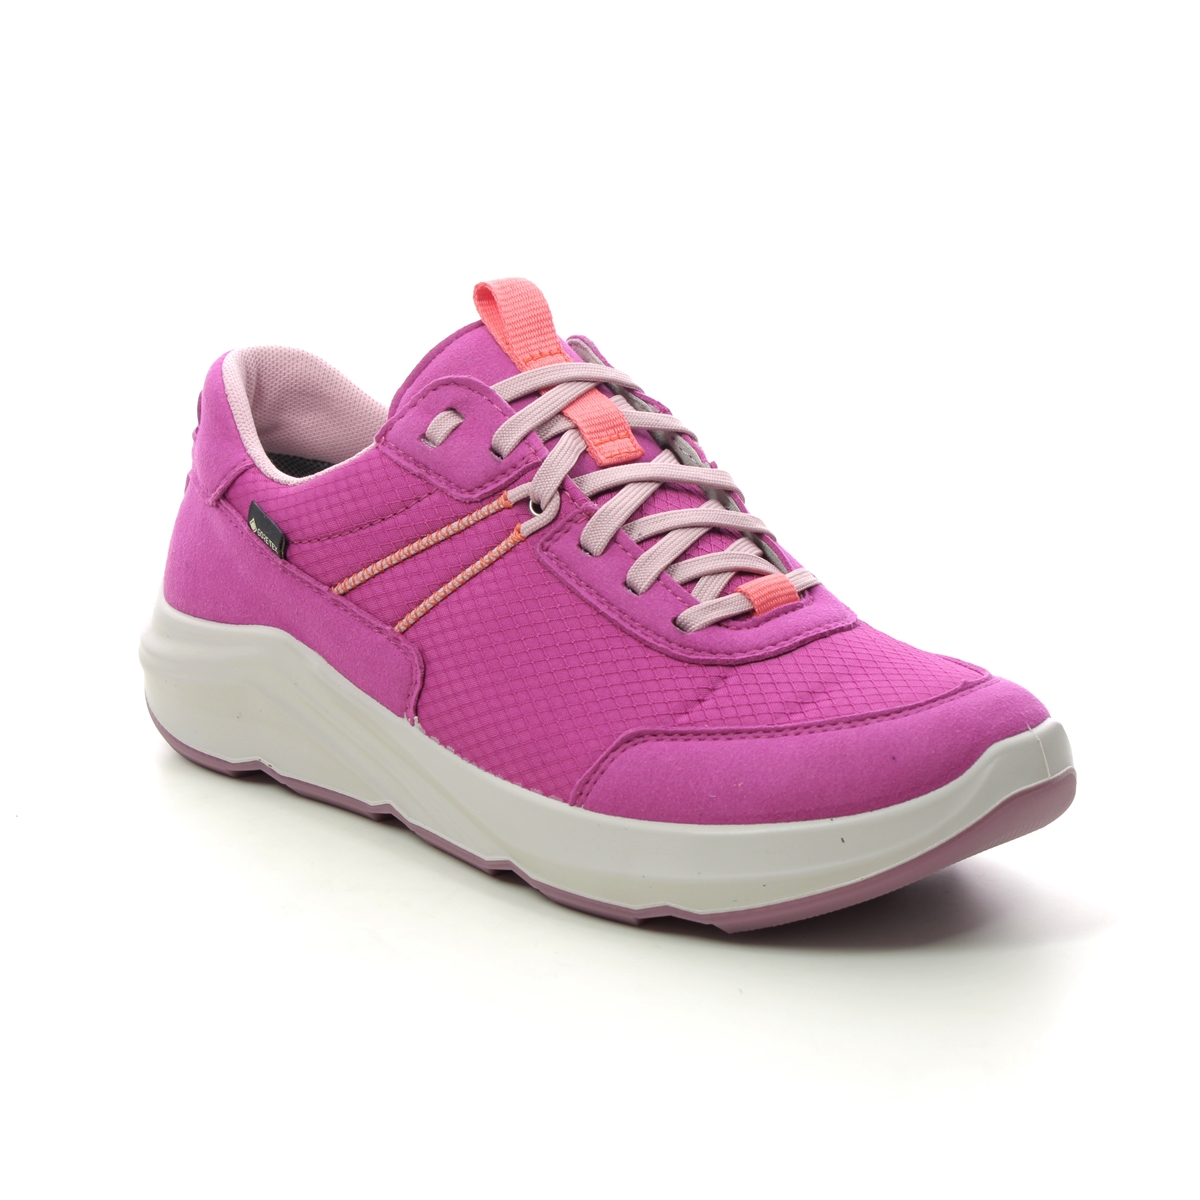 https://www.beggshoes.com/images/products/verylarge/legero-bliss-gtx-wide-fuchsia-womens-walking-shoes-2000318-5670-1709730809-052031862-01.jpg